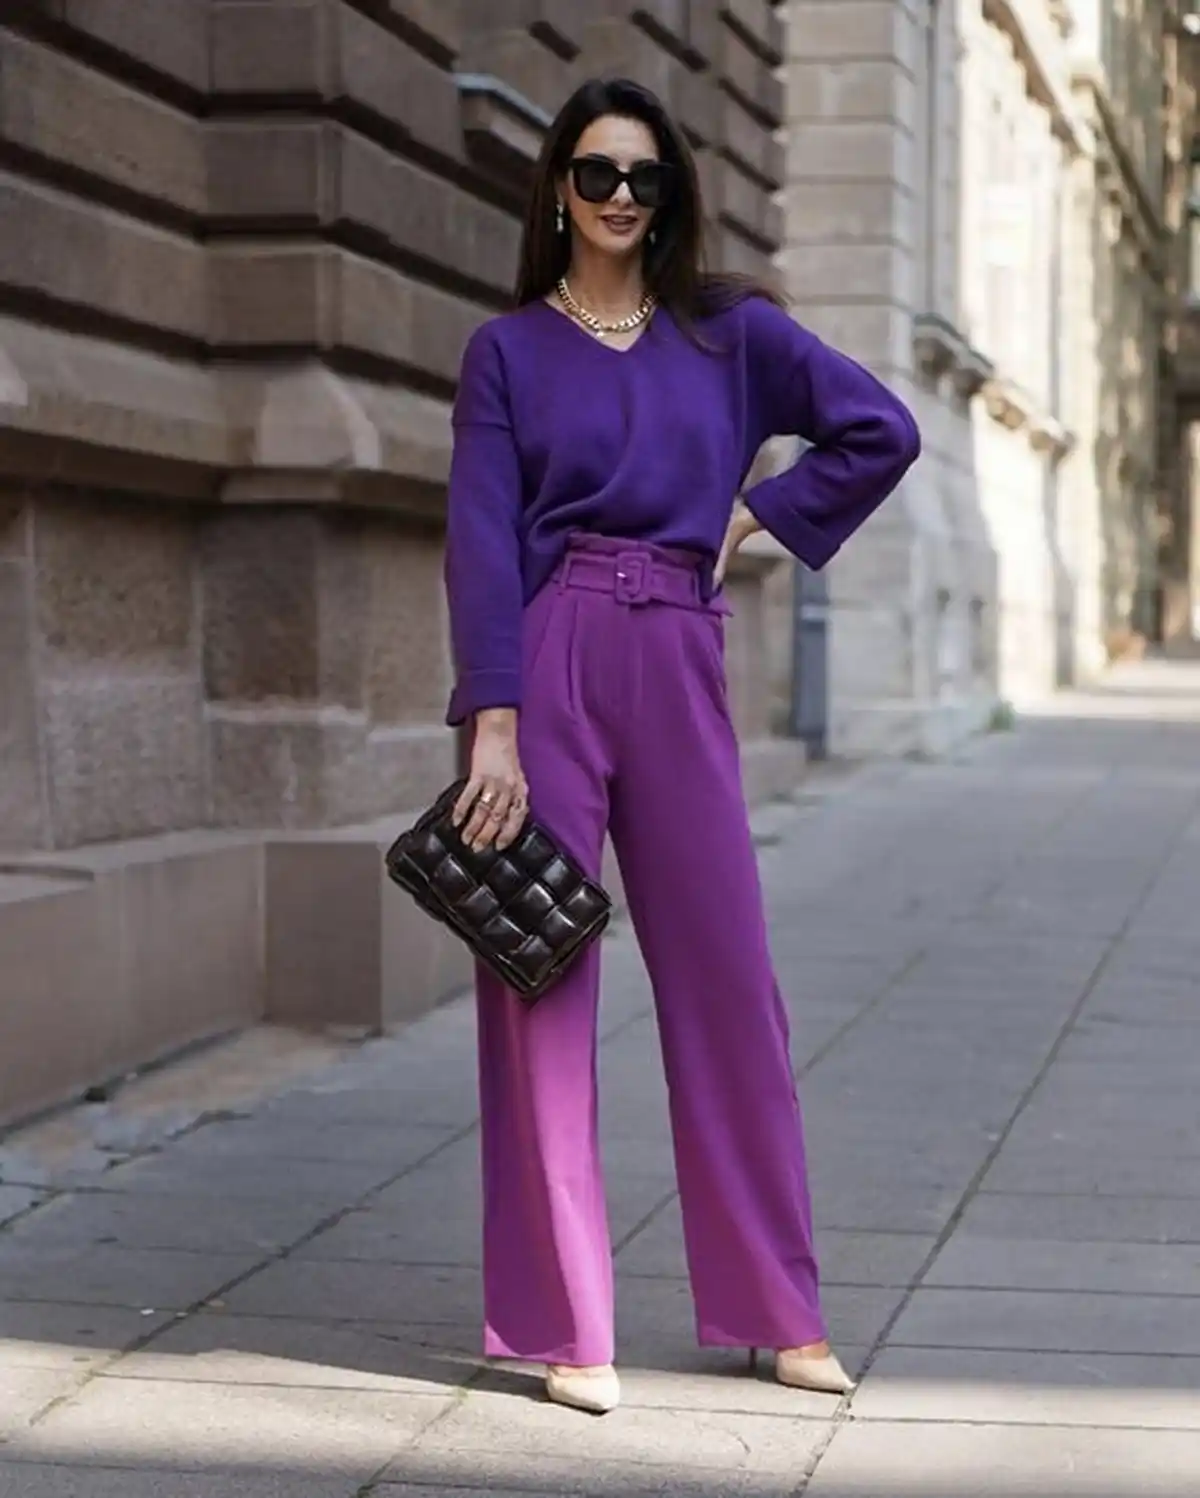 How to Style Purple Pants2 of 4 ways  My Stylosophy